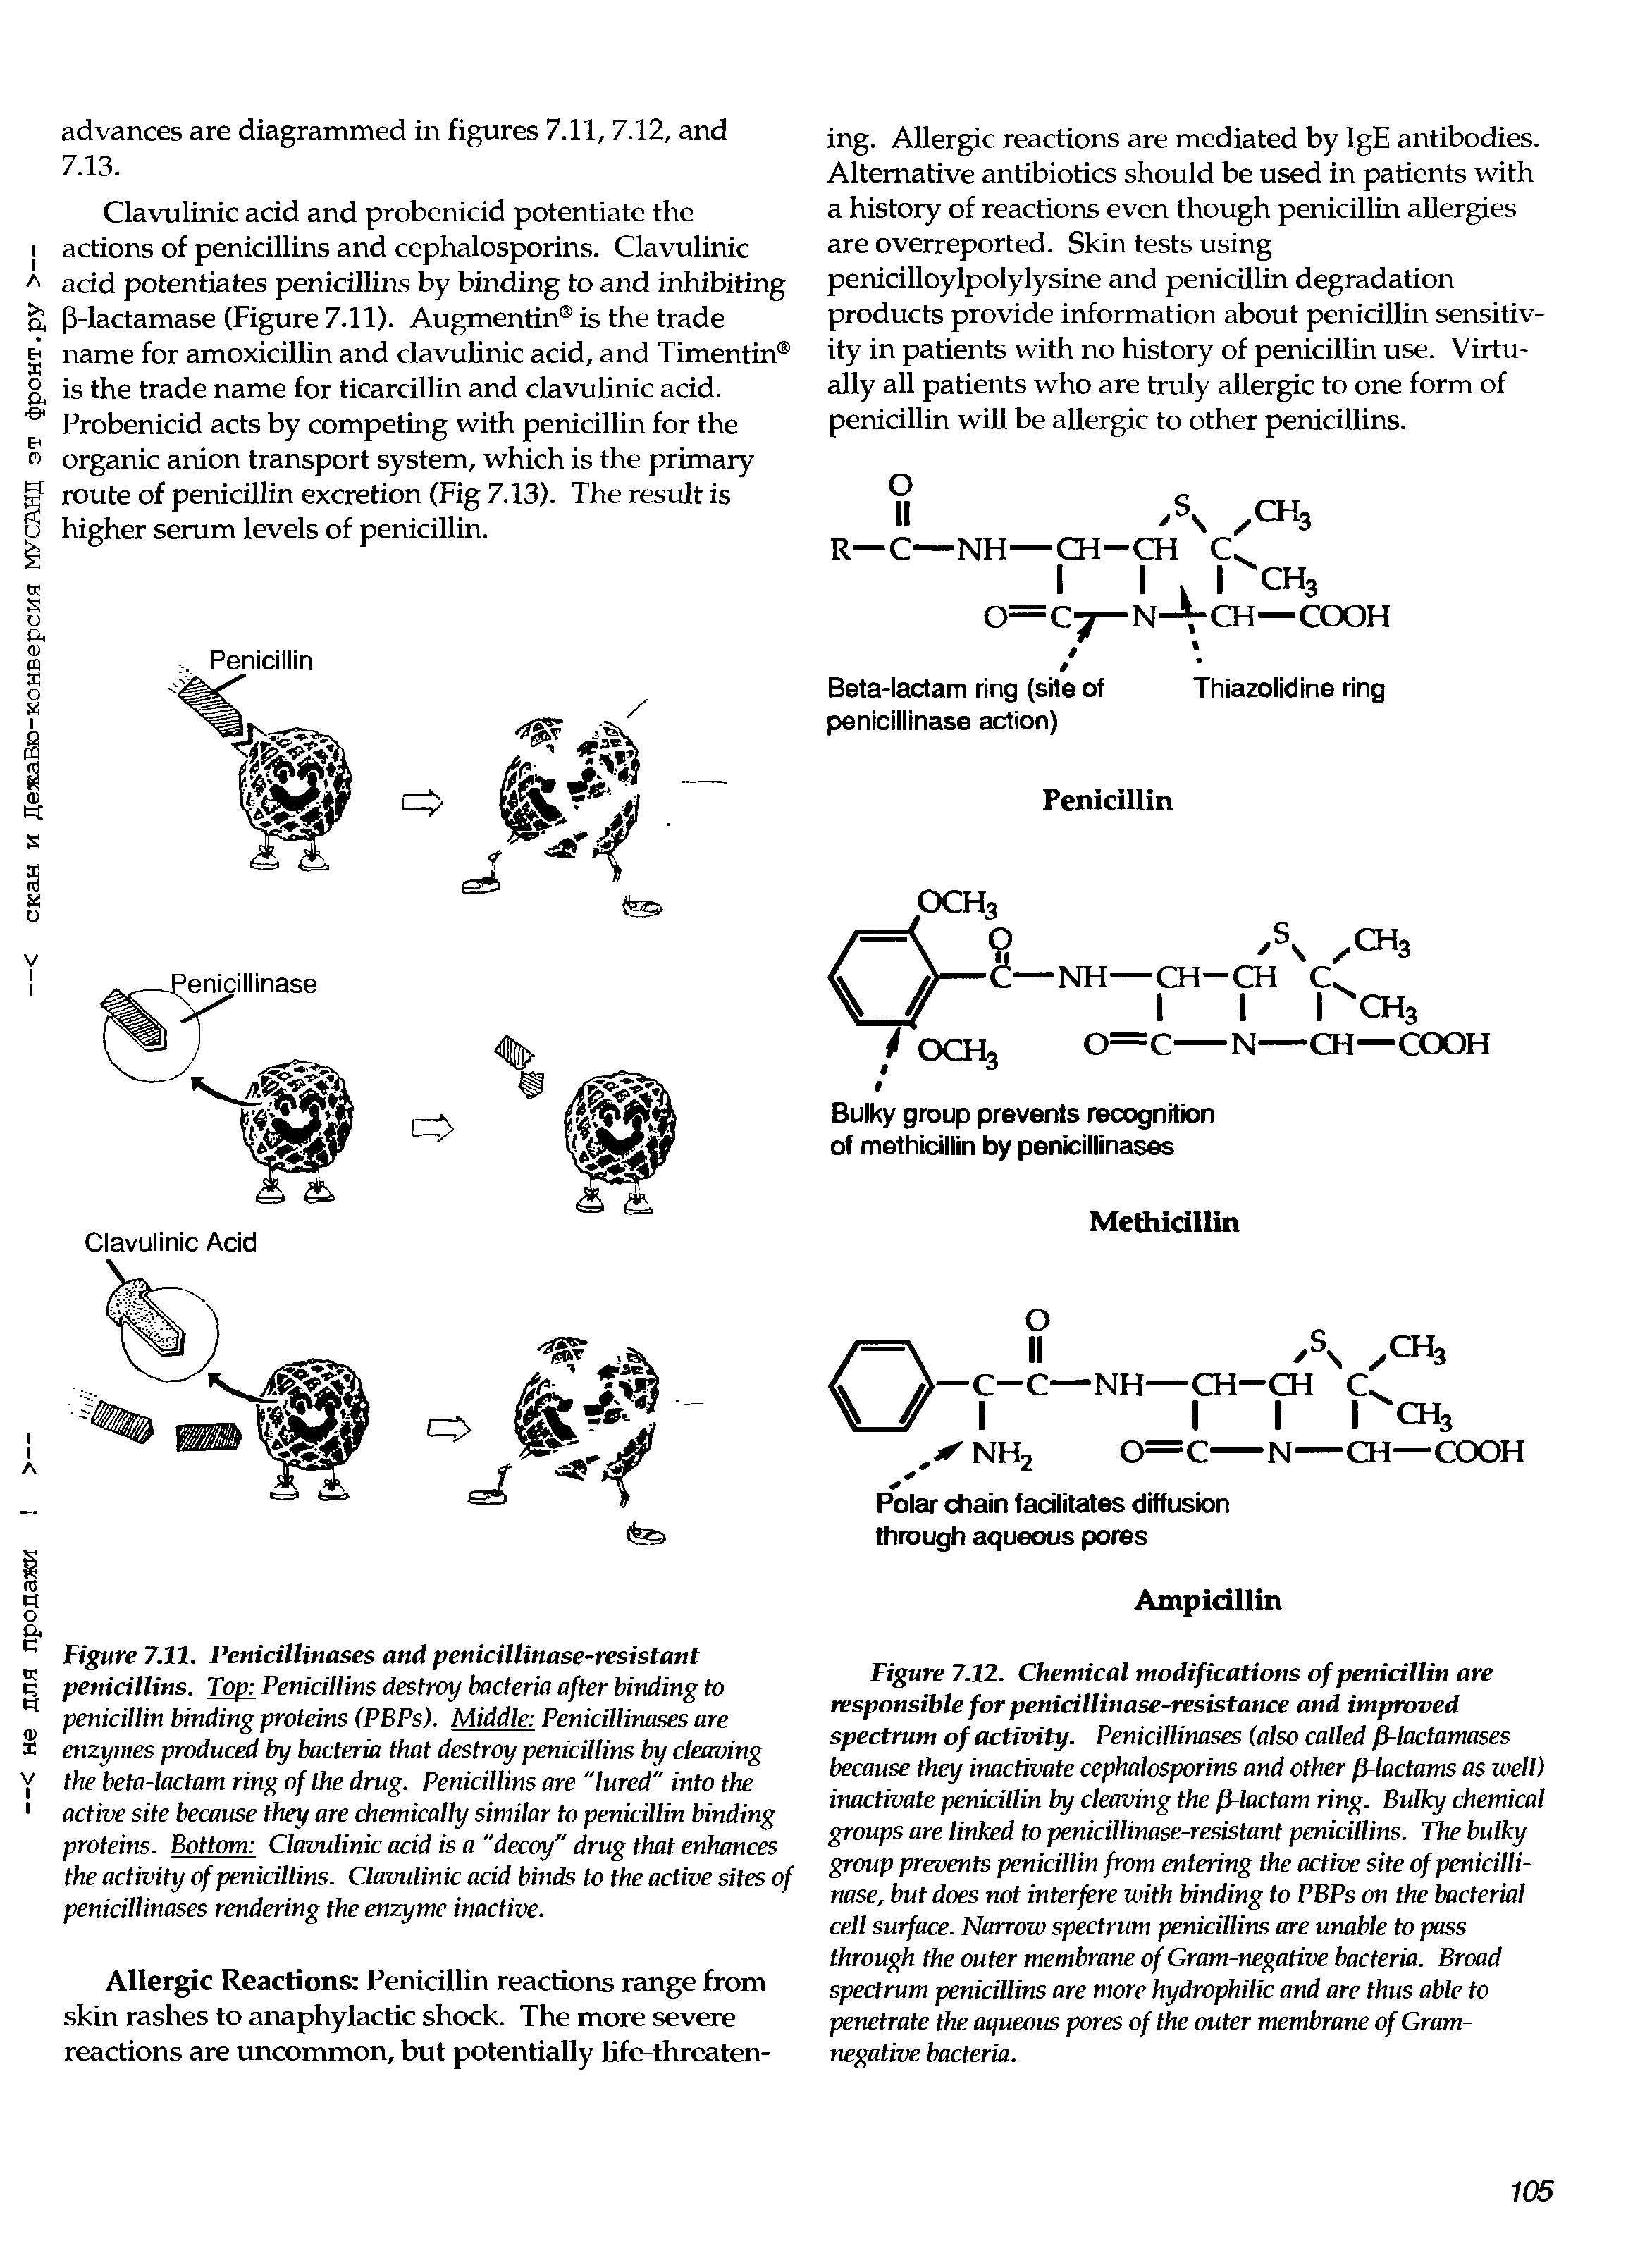 Figure 7.11. Penicillinases and penicillinase-resistant penicillins. Top Penicillins destroy bacteria after binding to penicillin binding proteins (PBPs). Middle Penicillinases are enzymes produced by bacteria that destroy penicillins by cleaving the beta-lactam ring of the drug. Penicillins are "lured" into the active site because they are chemically similar to penicillin binding proteins. Bottom Clavulinic acid is a "decoy" drug that enhances the activity of penicillins. Clavulinic acid binds to the active sites of penicillinases rendering the enzyme inactive.